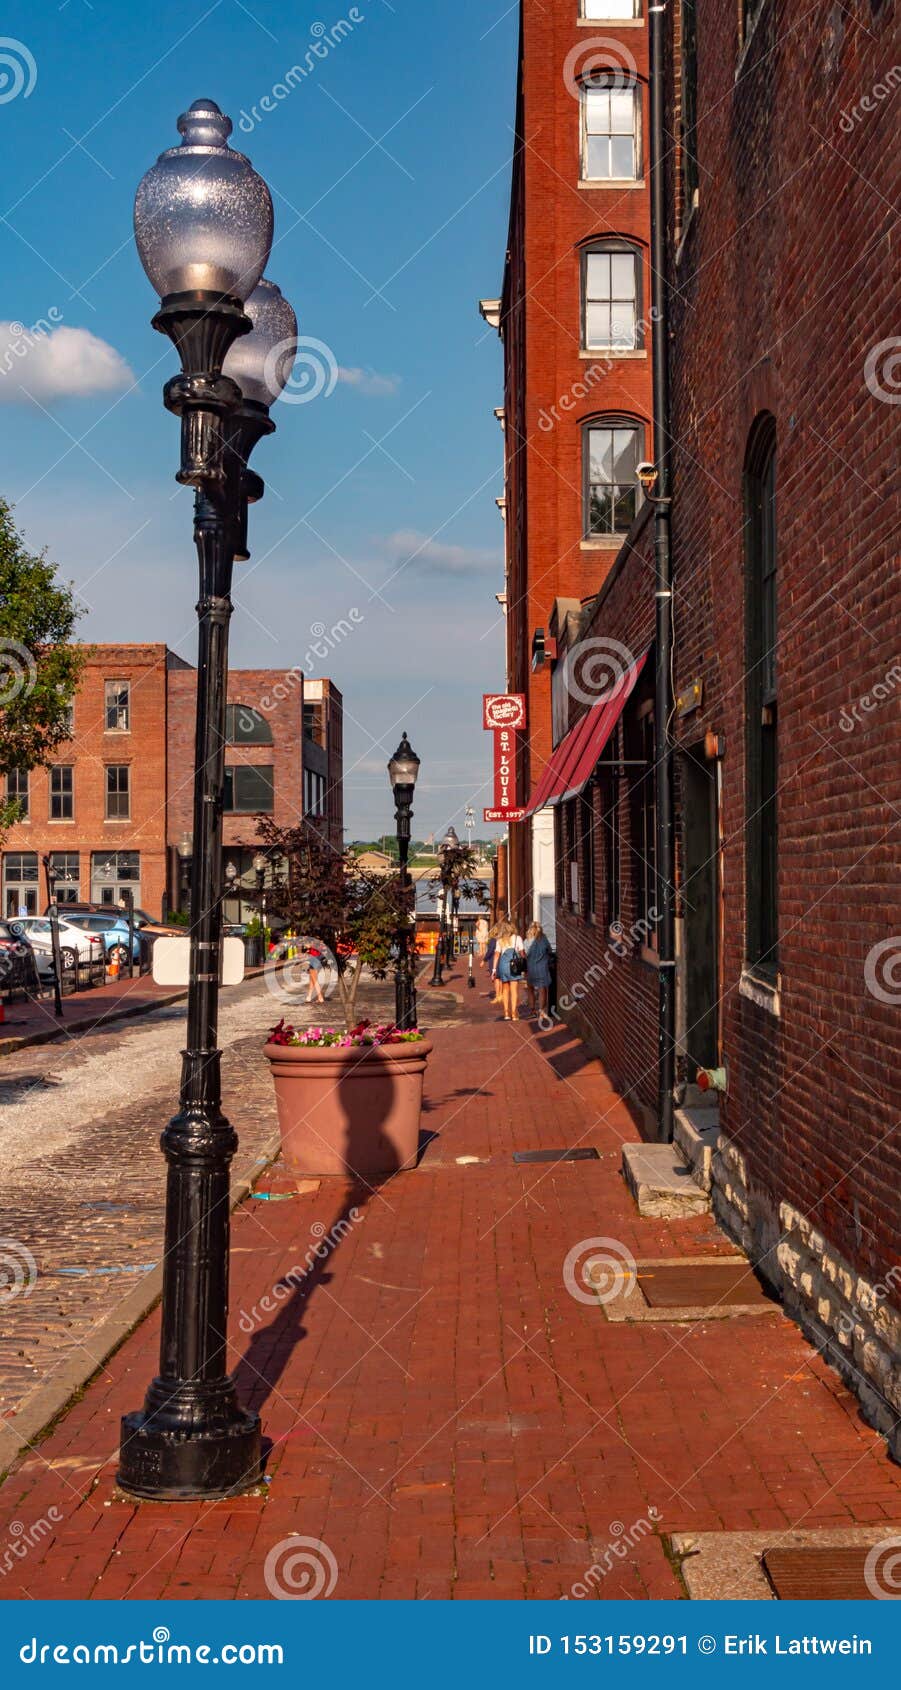 Lacledes Landing In Old Town St. Louis - SAINT LOUIS. USA - JUNE 19, 2019 Editorial Photo ...